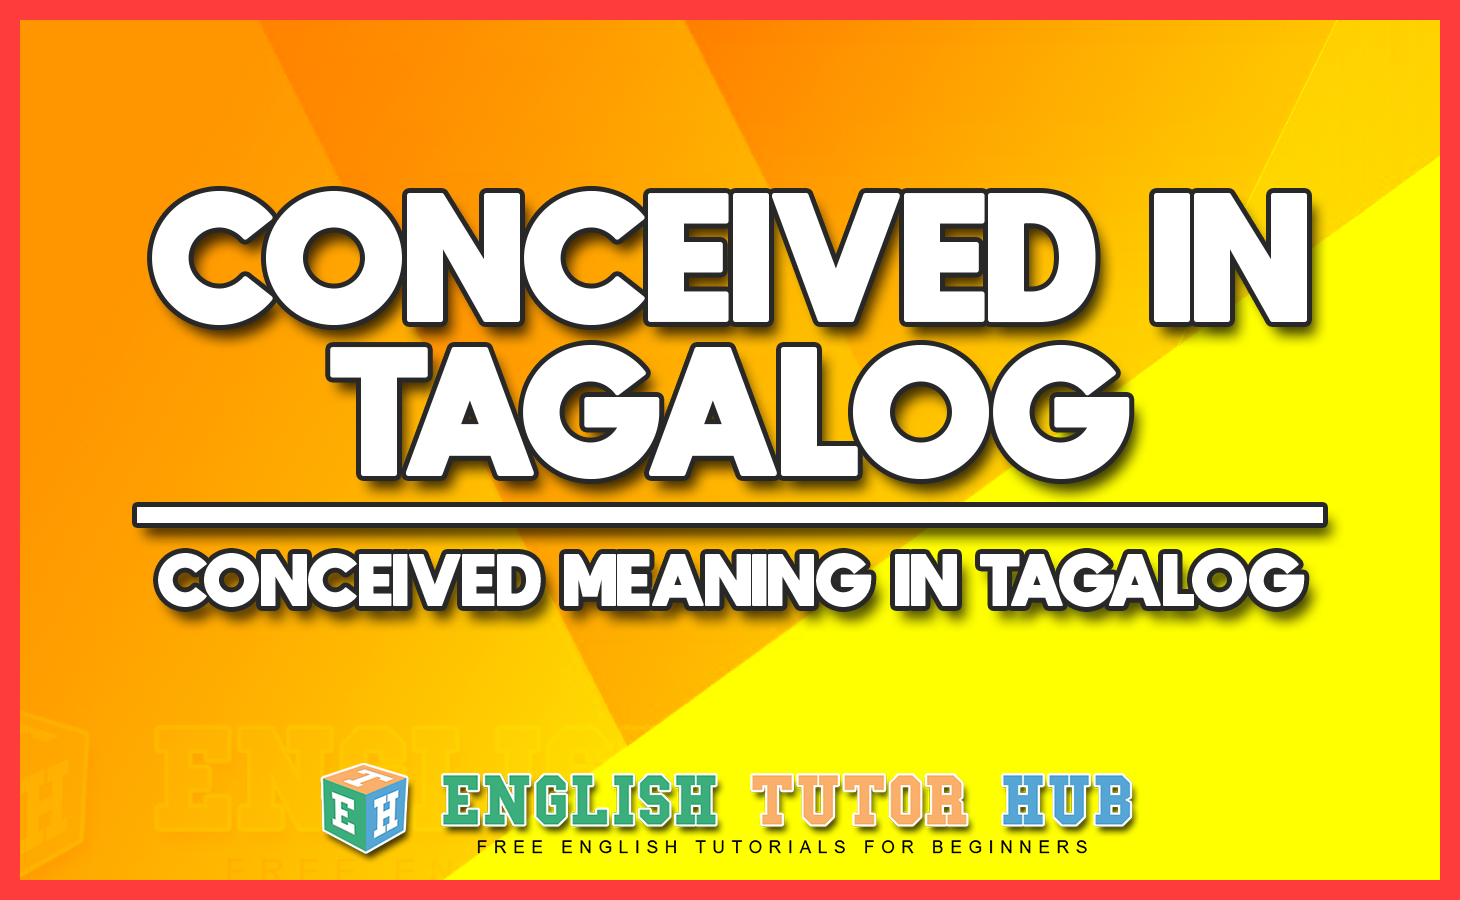 CONCEIVED IN TAGALOG - CONCEIVED MEANING IN TAGALOG